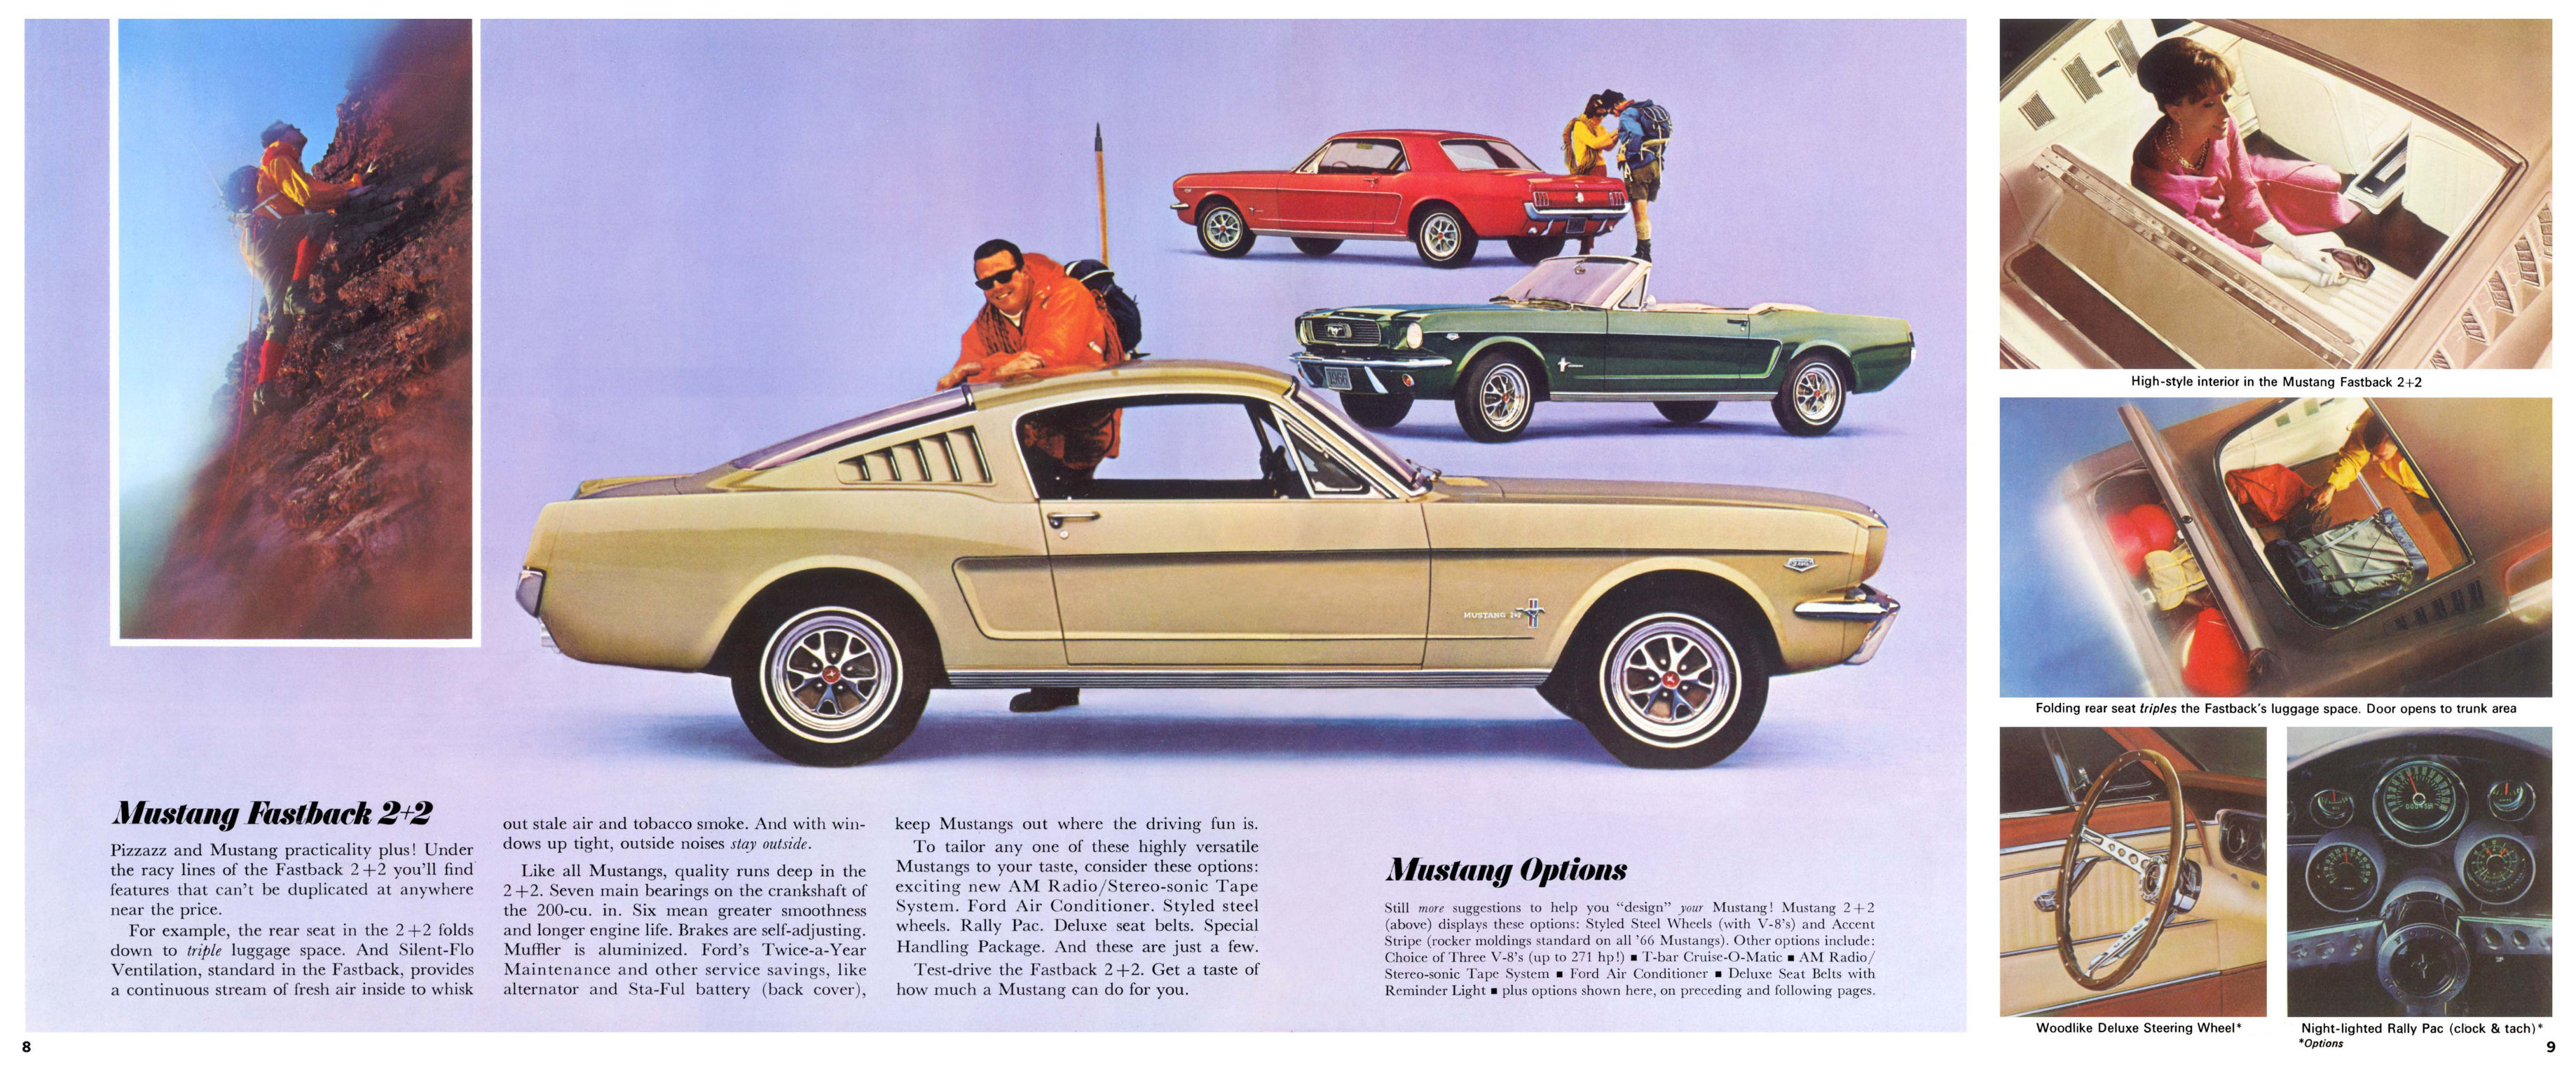 1966_Ford_Mustang-08-09